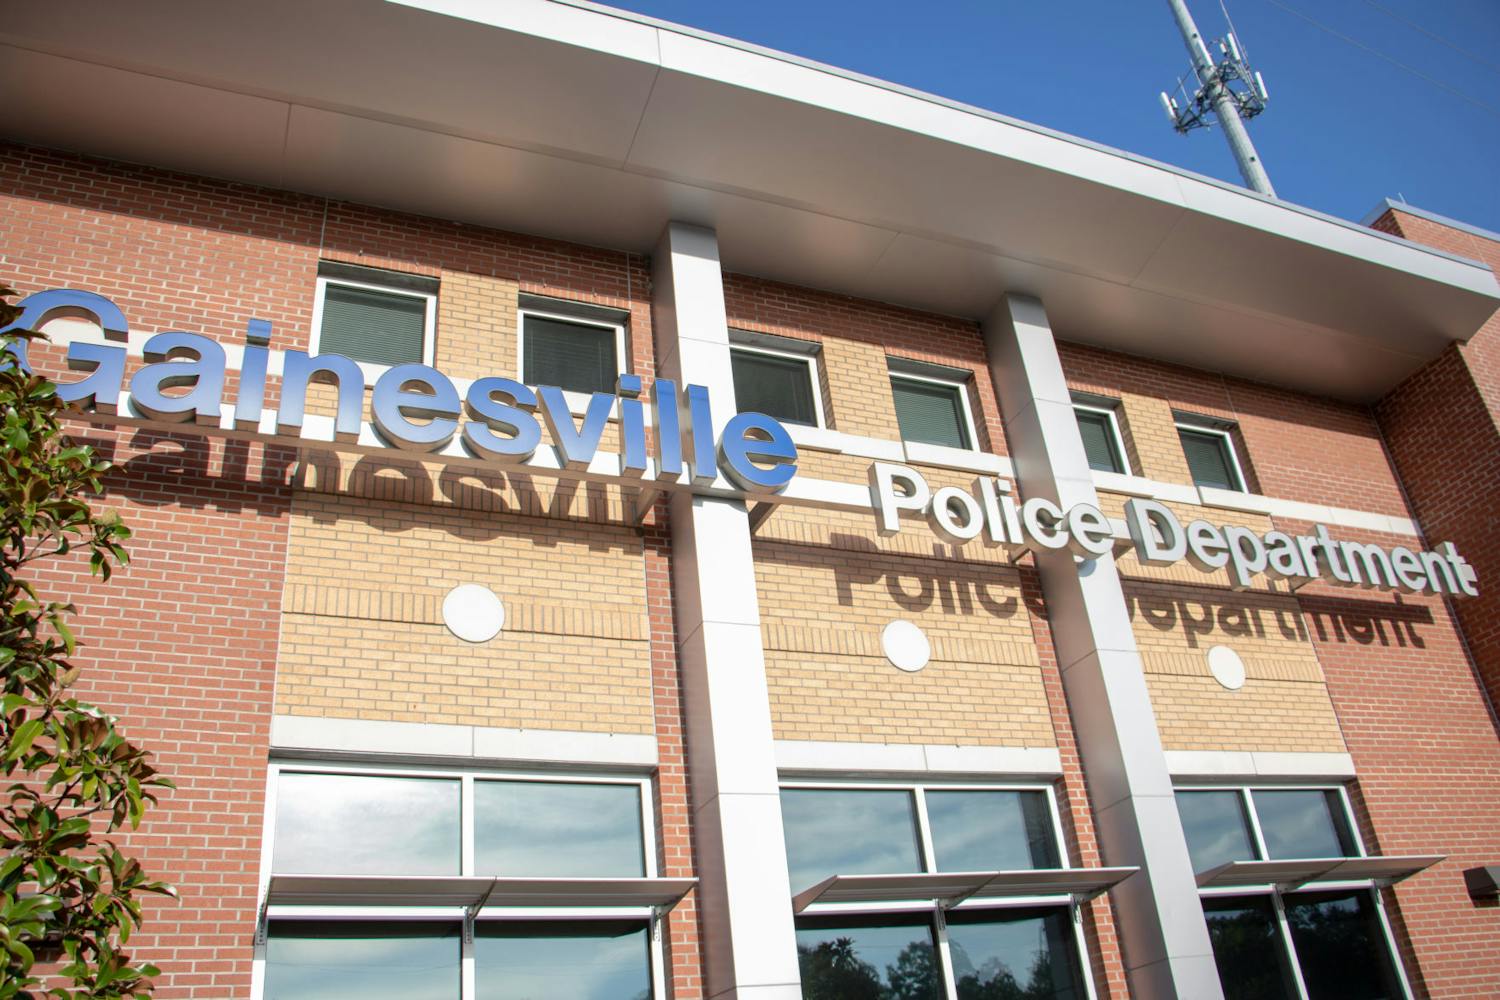 The Gainesville Police Department building is located at 545 NW 8th Ave. 